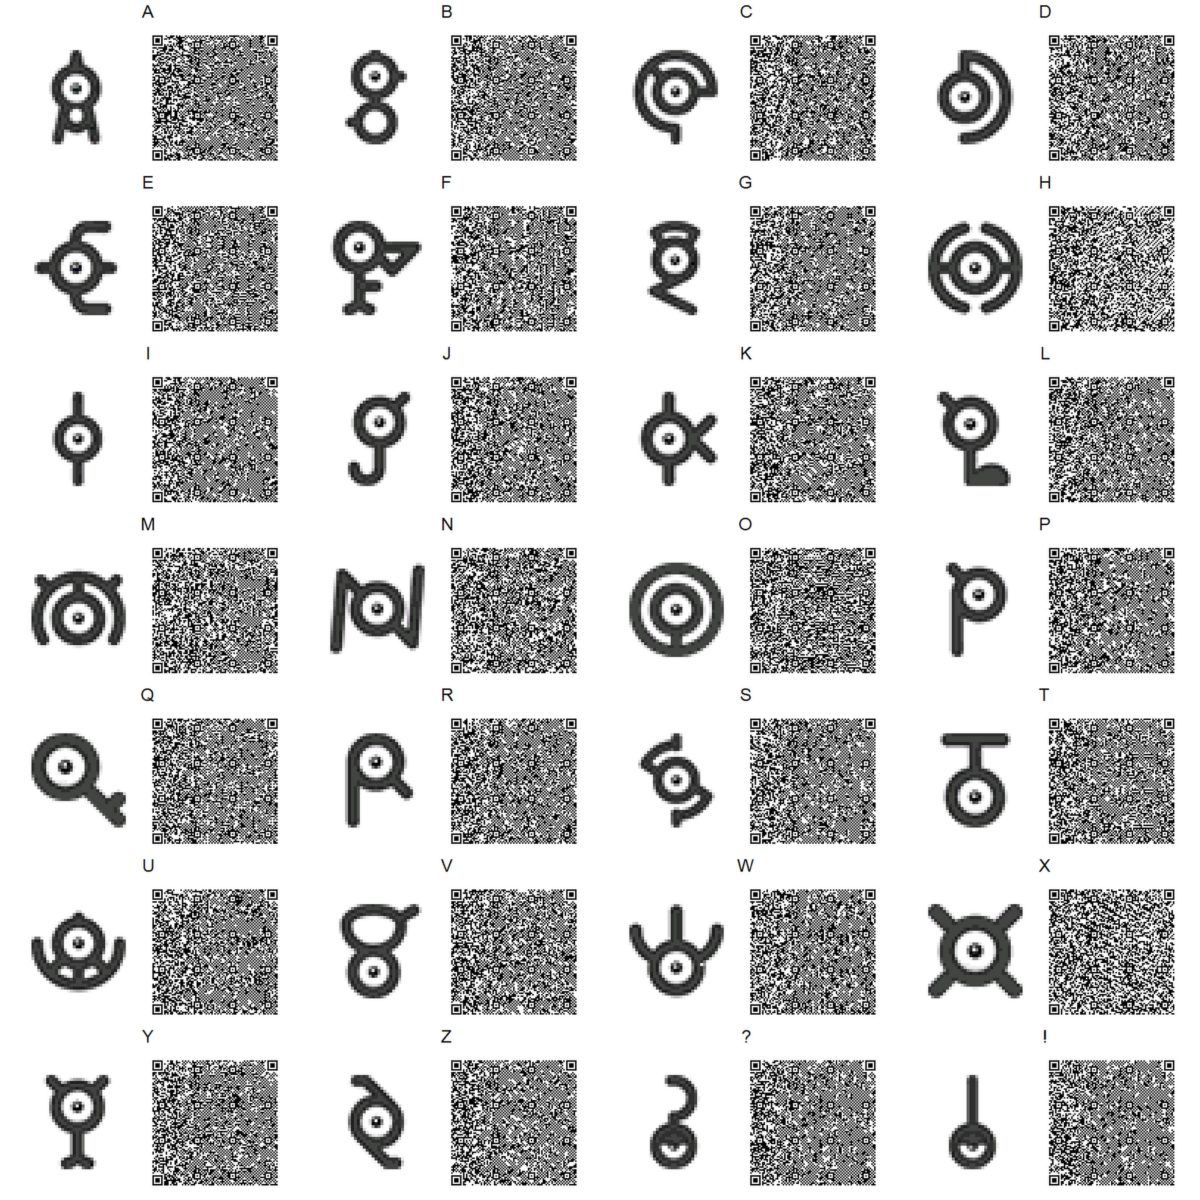 Pokemon Unown Forms Pattern for ACNL by toxicsquall on DeviantArt